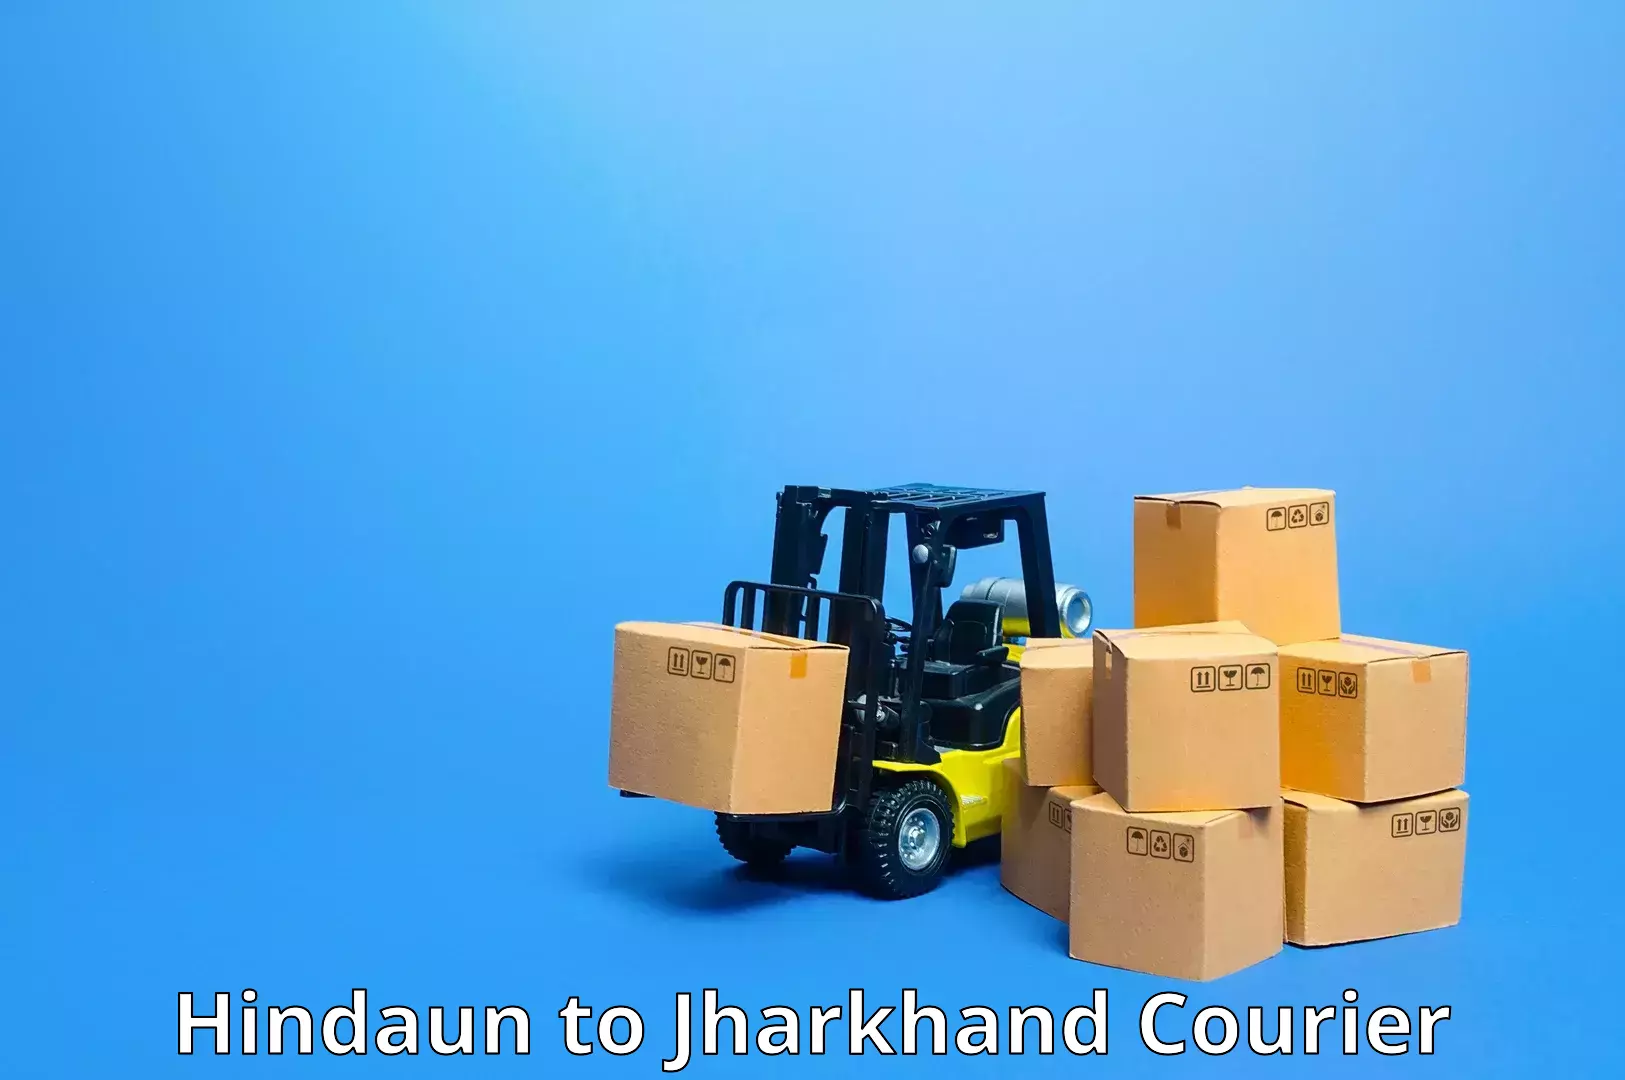 Courier service efficiency in Hindaun to Godabar Chatra